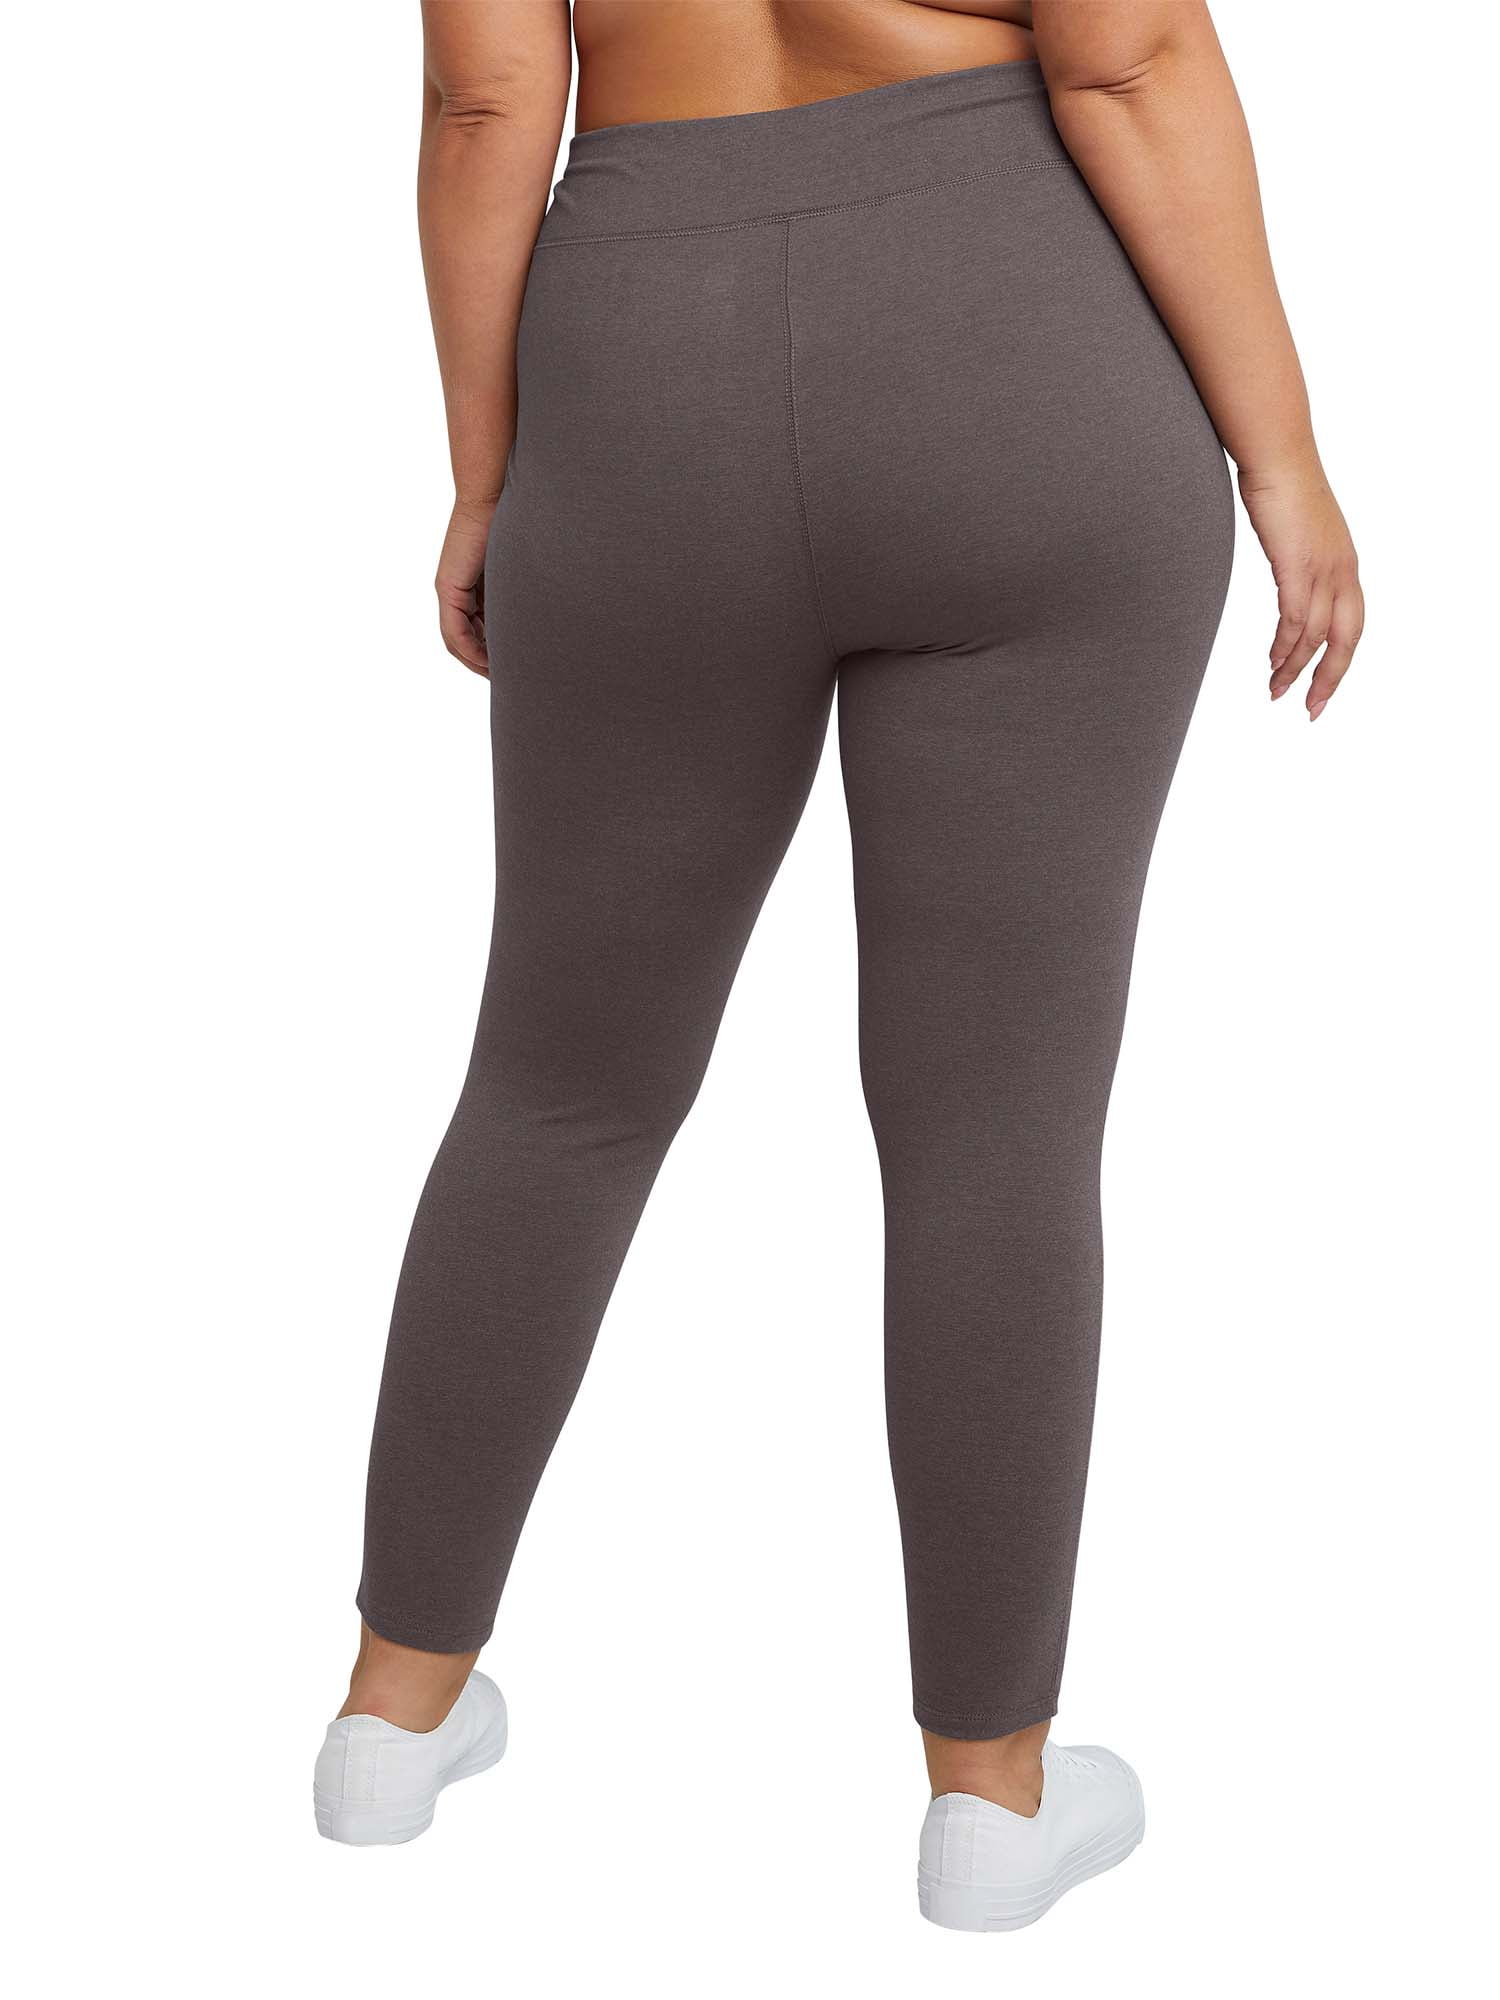 Womens Leggings 2021 Women Summer Fashion Sexy Lace Legging Ripped Hole  Ankle Length Pants Casual Trousers Plus Size Leggins Fitness From Samanthe,  $24.87